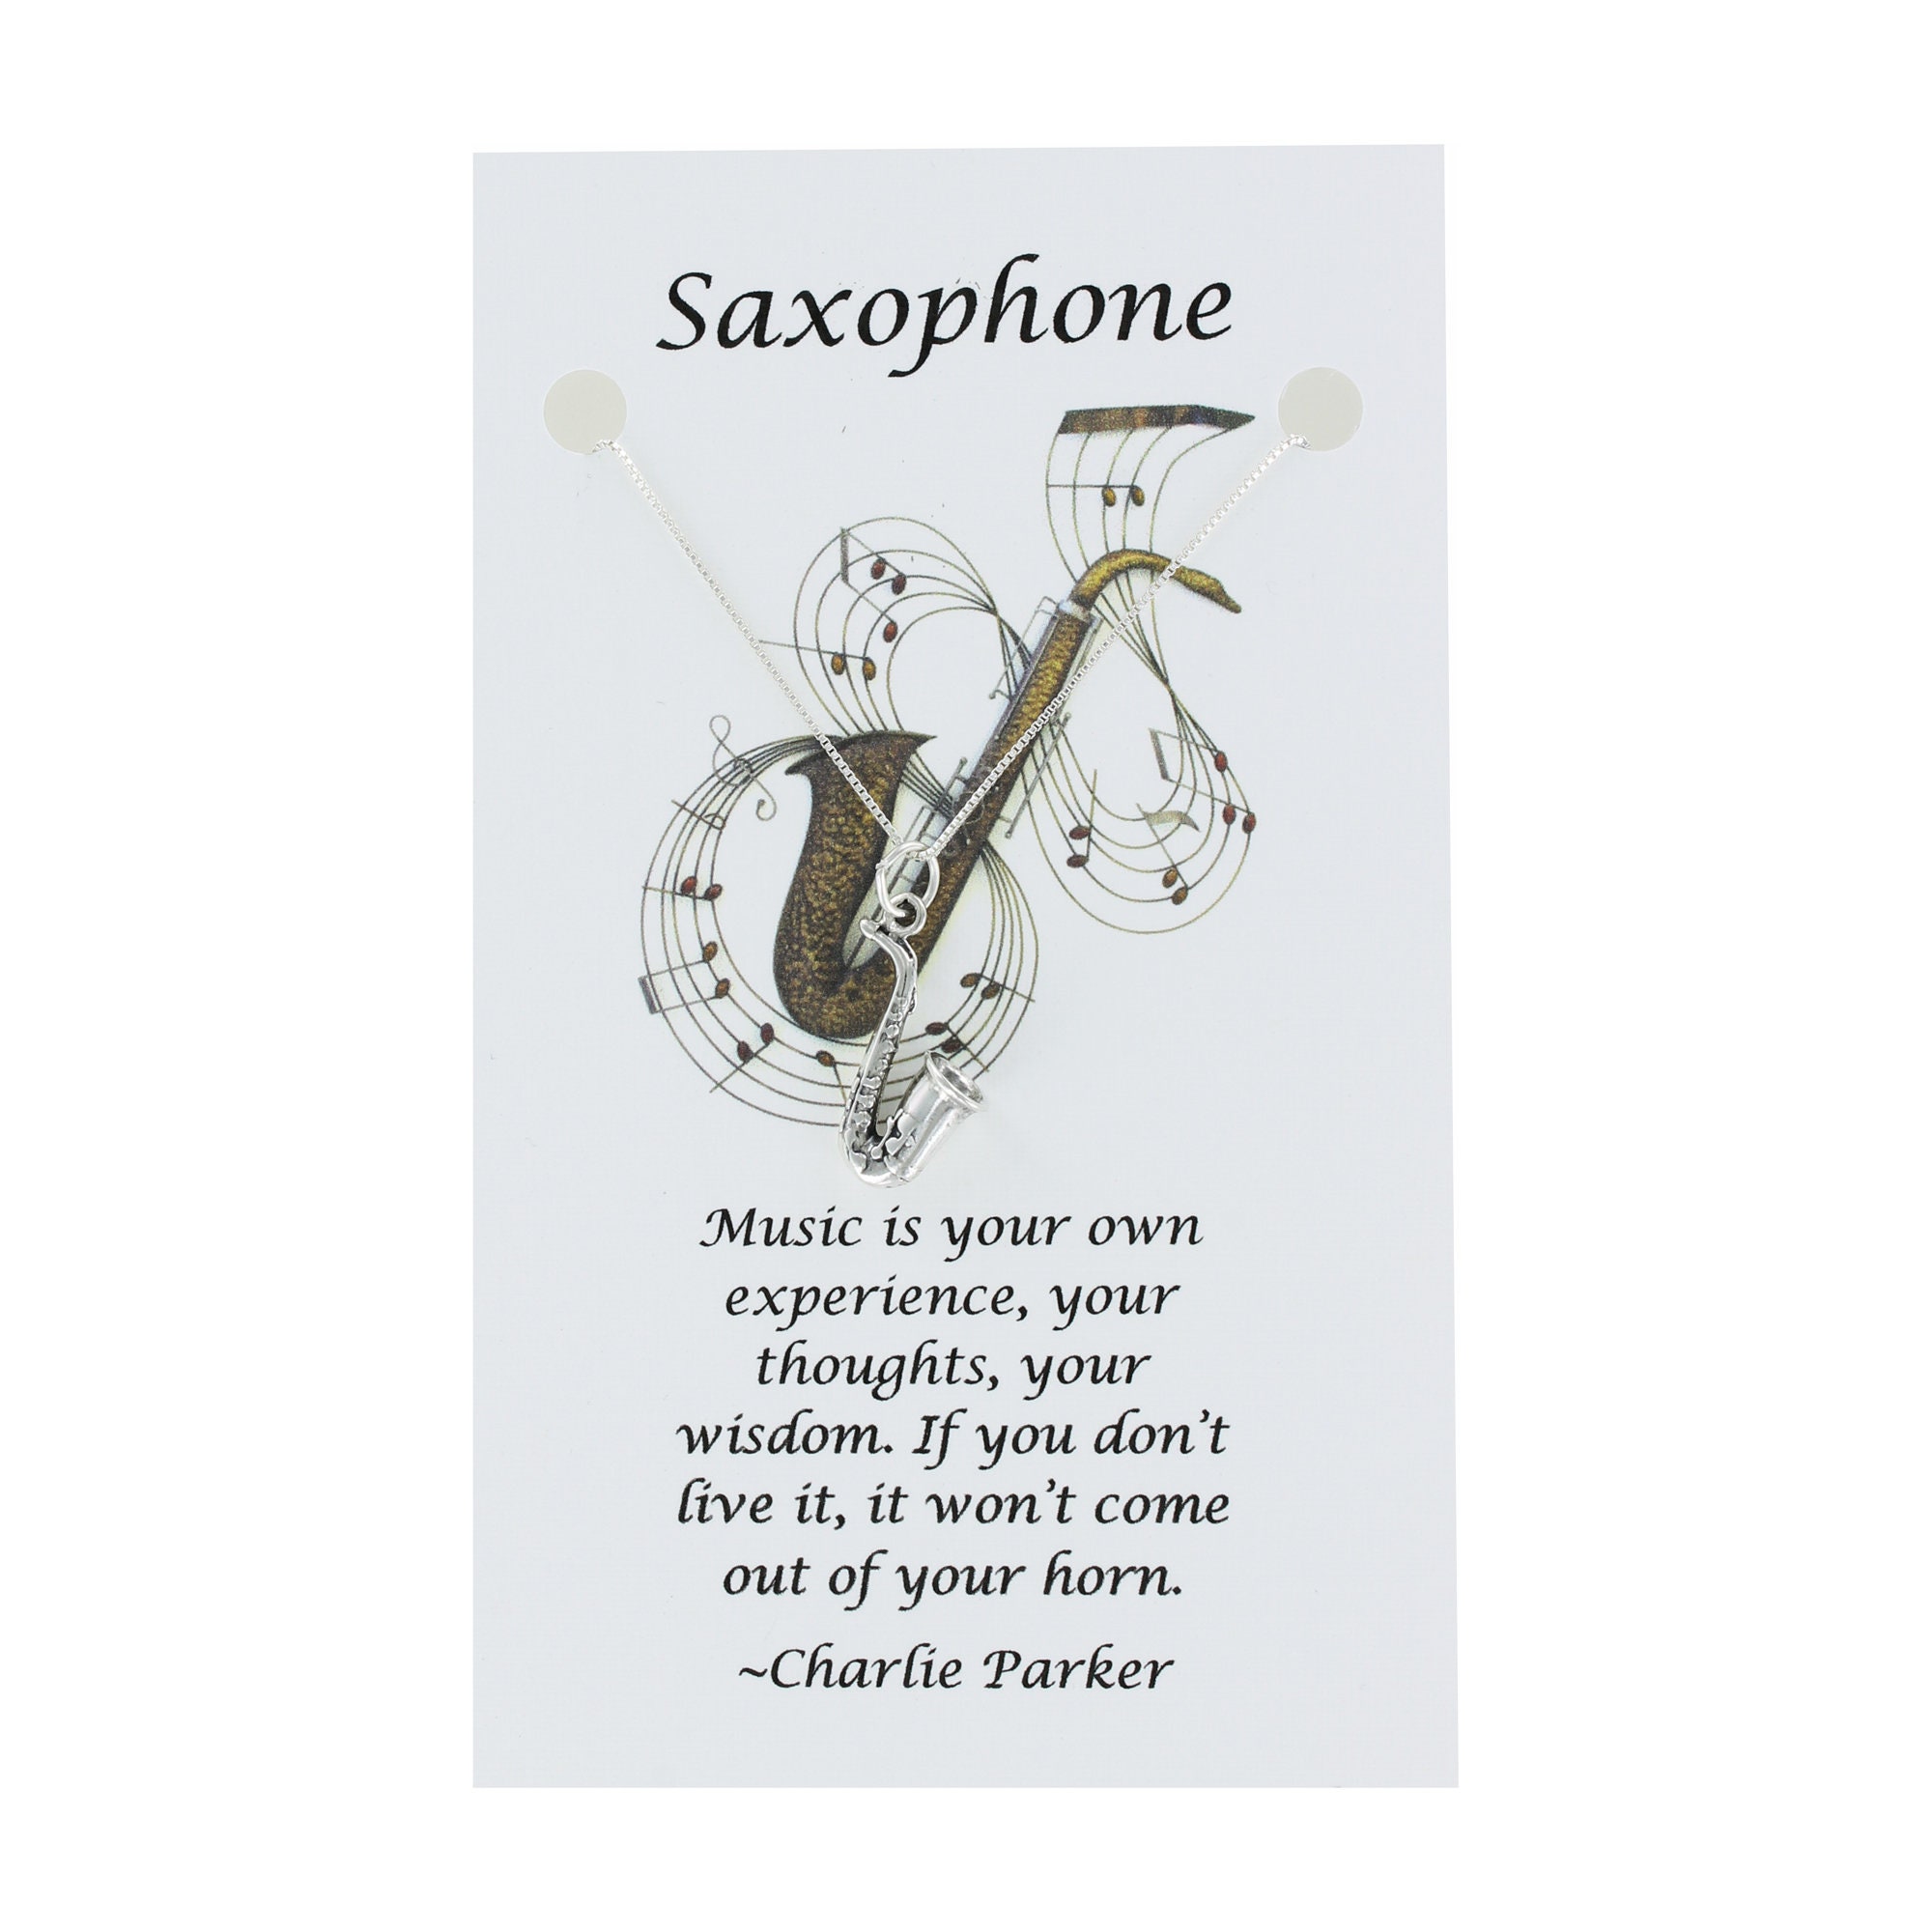 Silver Jewelry,gift for musician CP192 saxaphone necklace Jewelry,saxaphone necklace saxaphone initial necklace